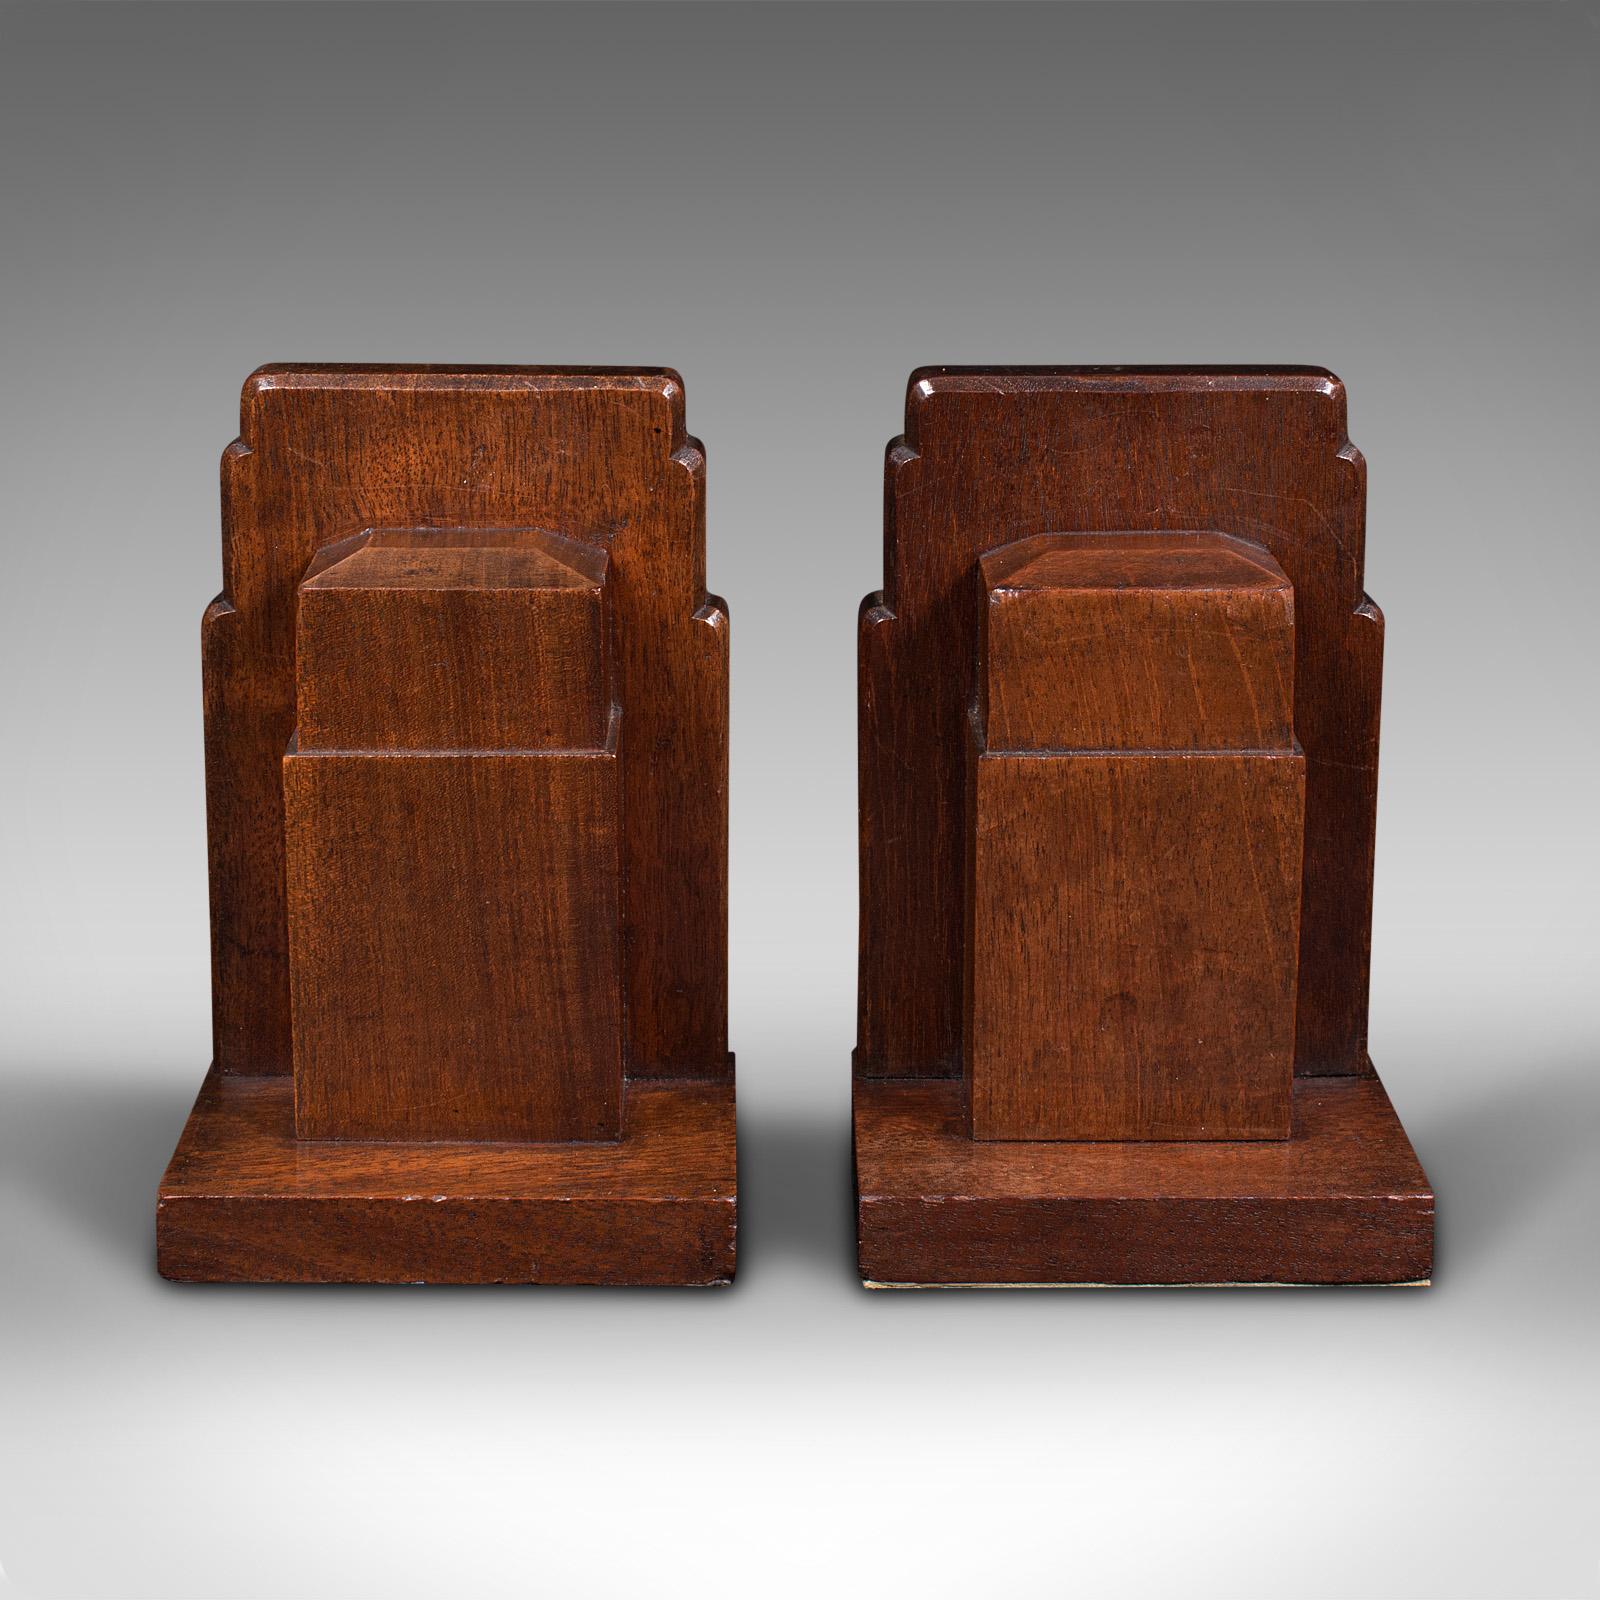 British Vintage Pair of Decorative Bookends, English, Walnut, Gordon Russell, Circa 1930 For Sale